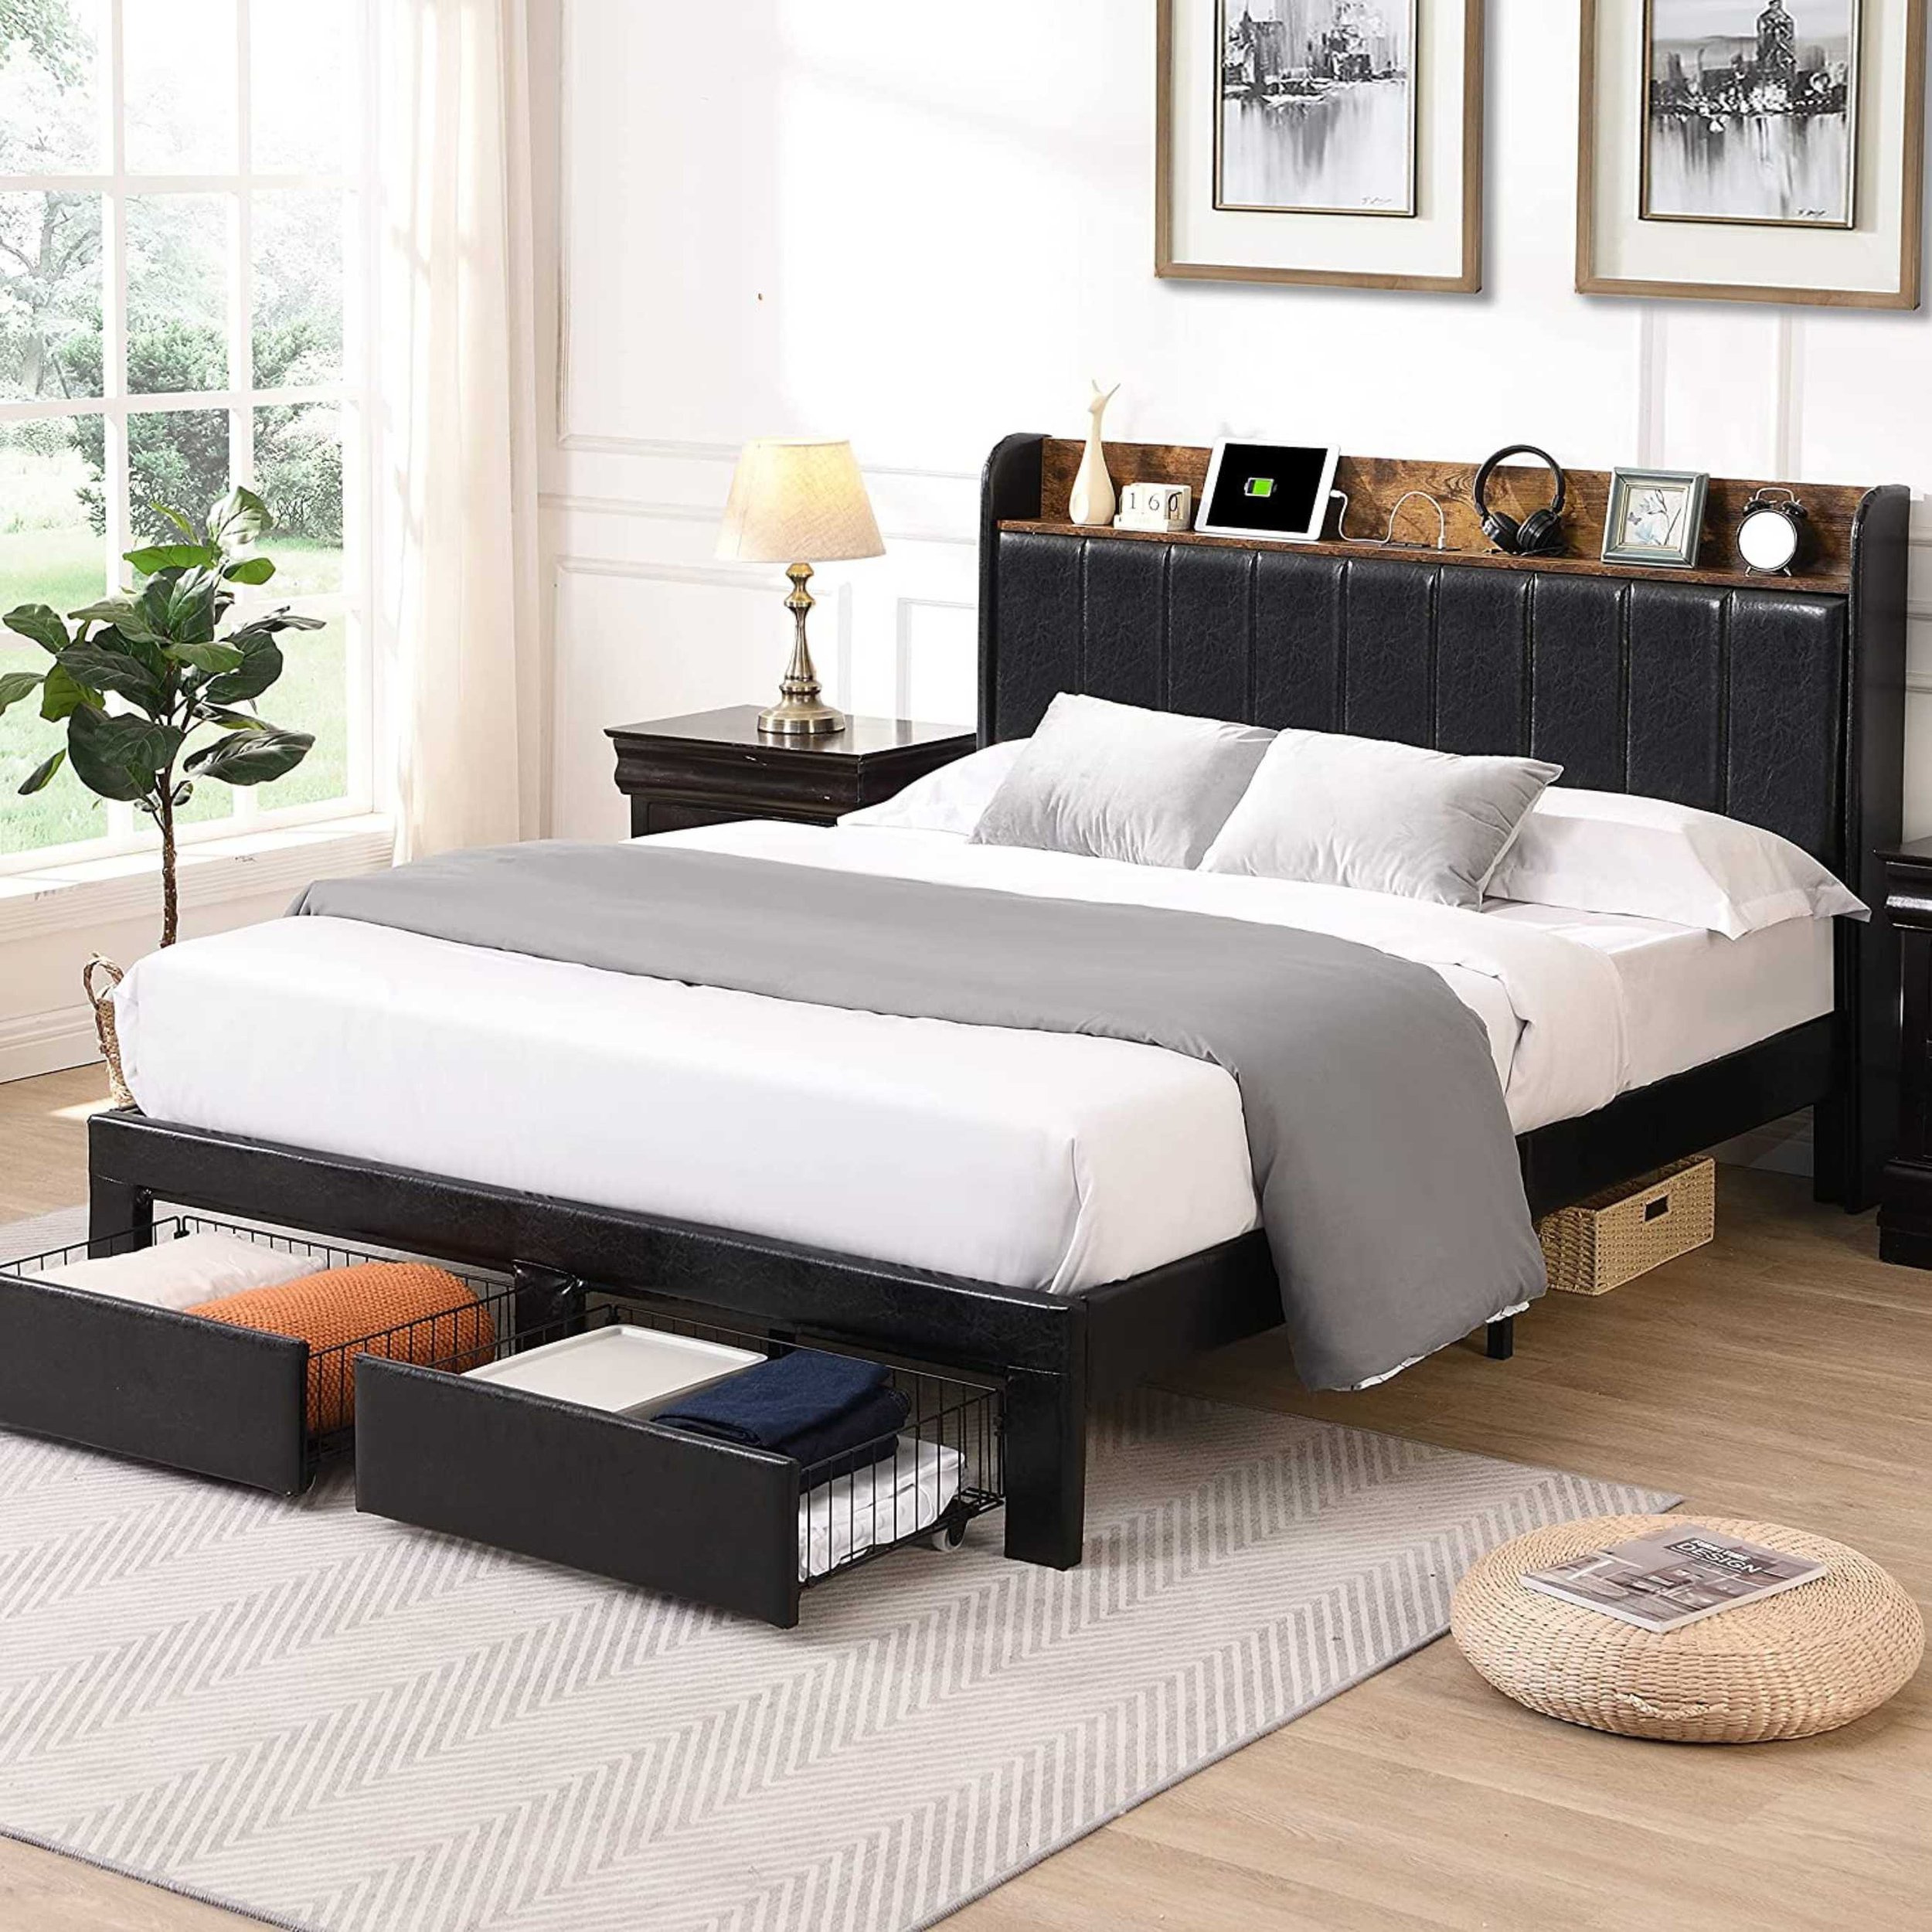 Faux Leather Black Platform Bed with Drawers and Shelving.jpg